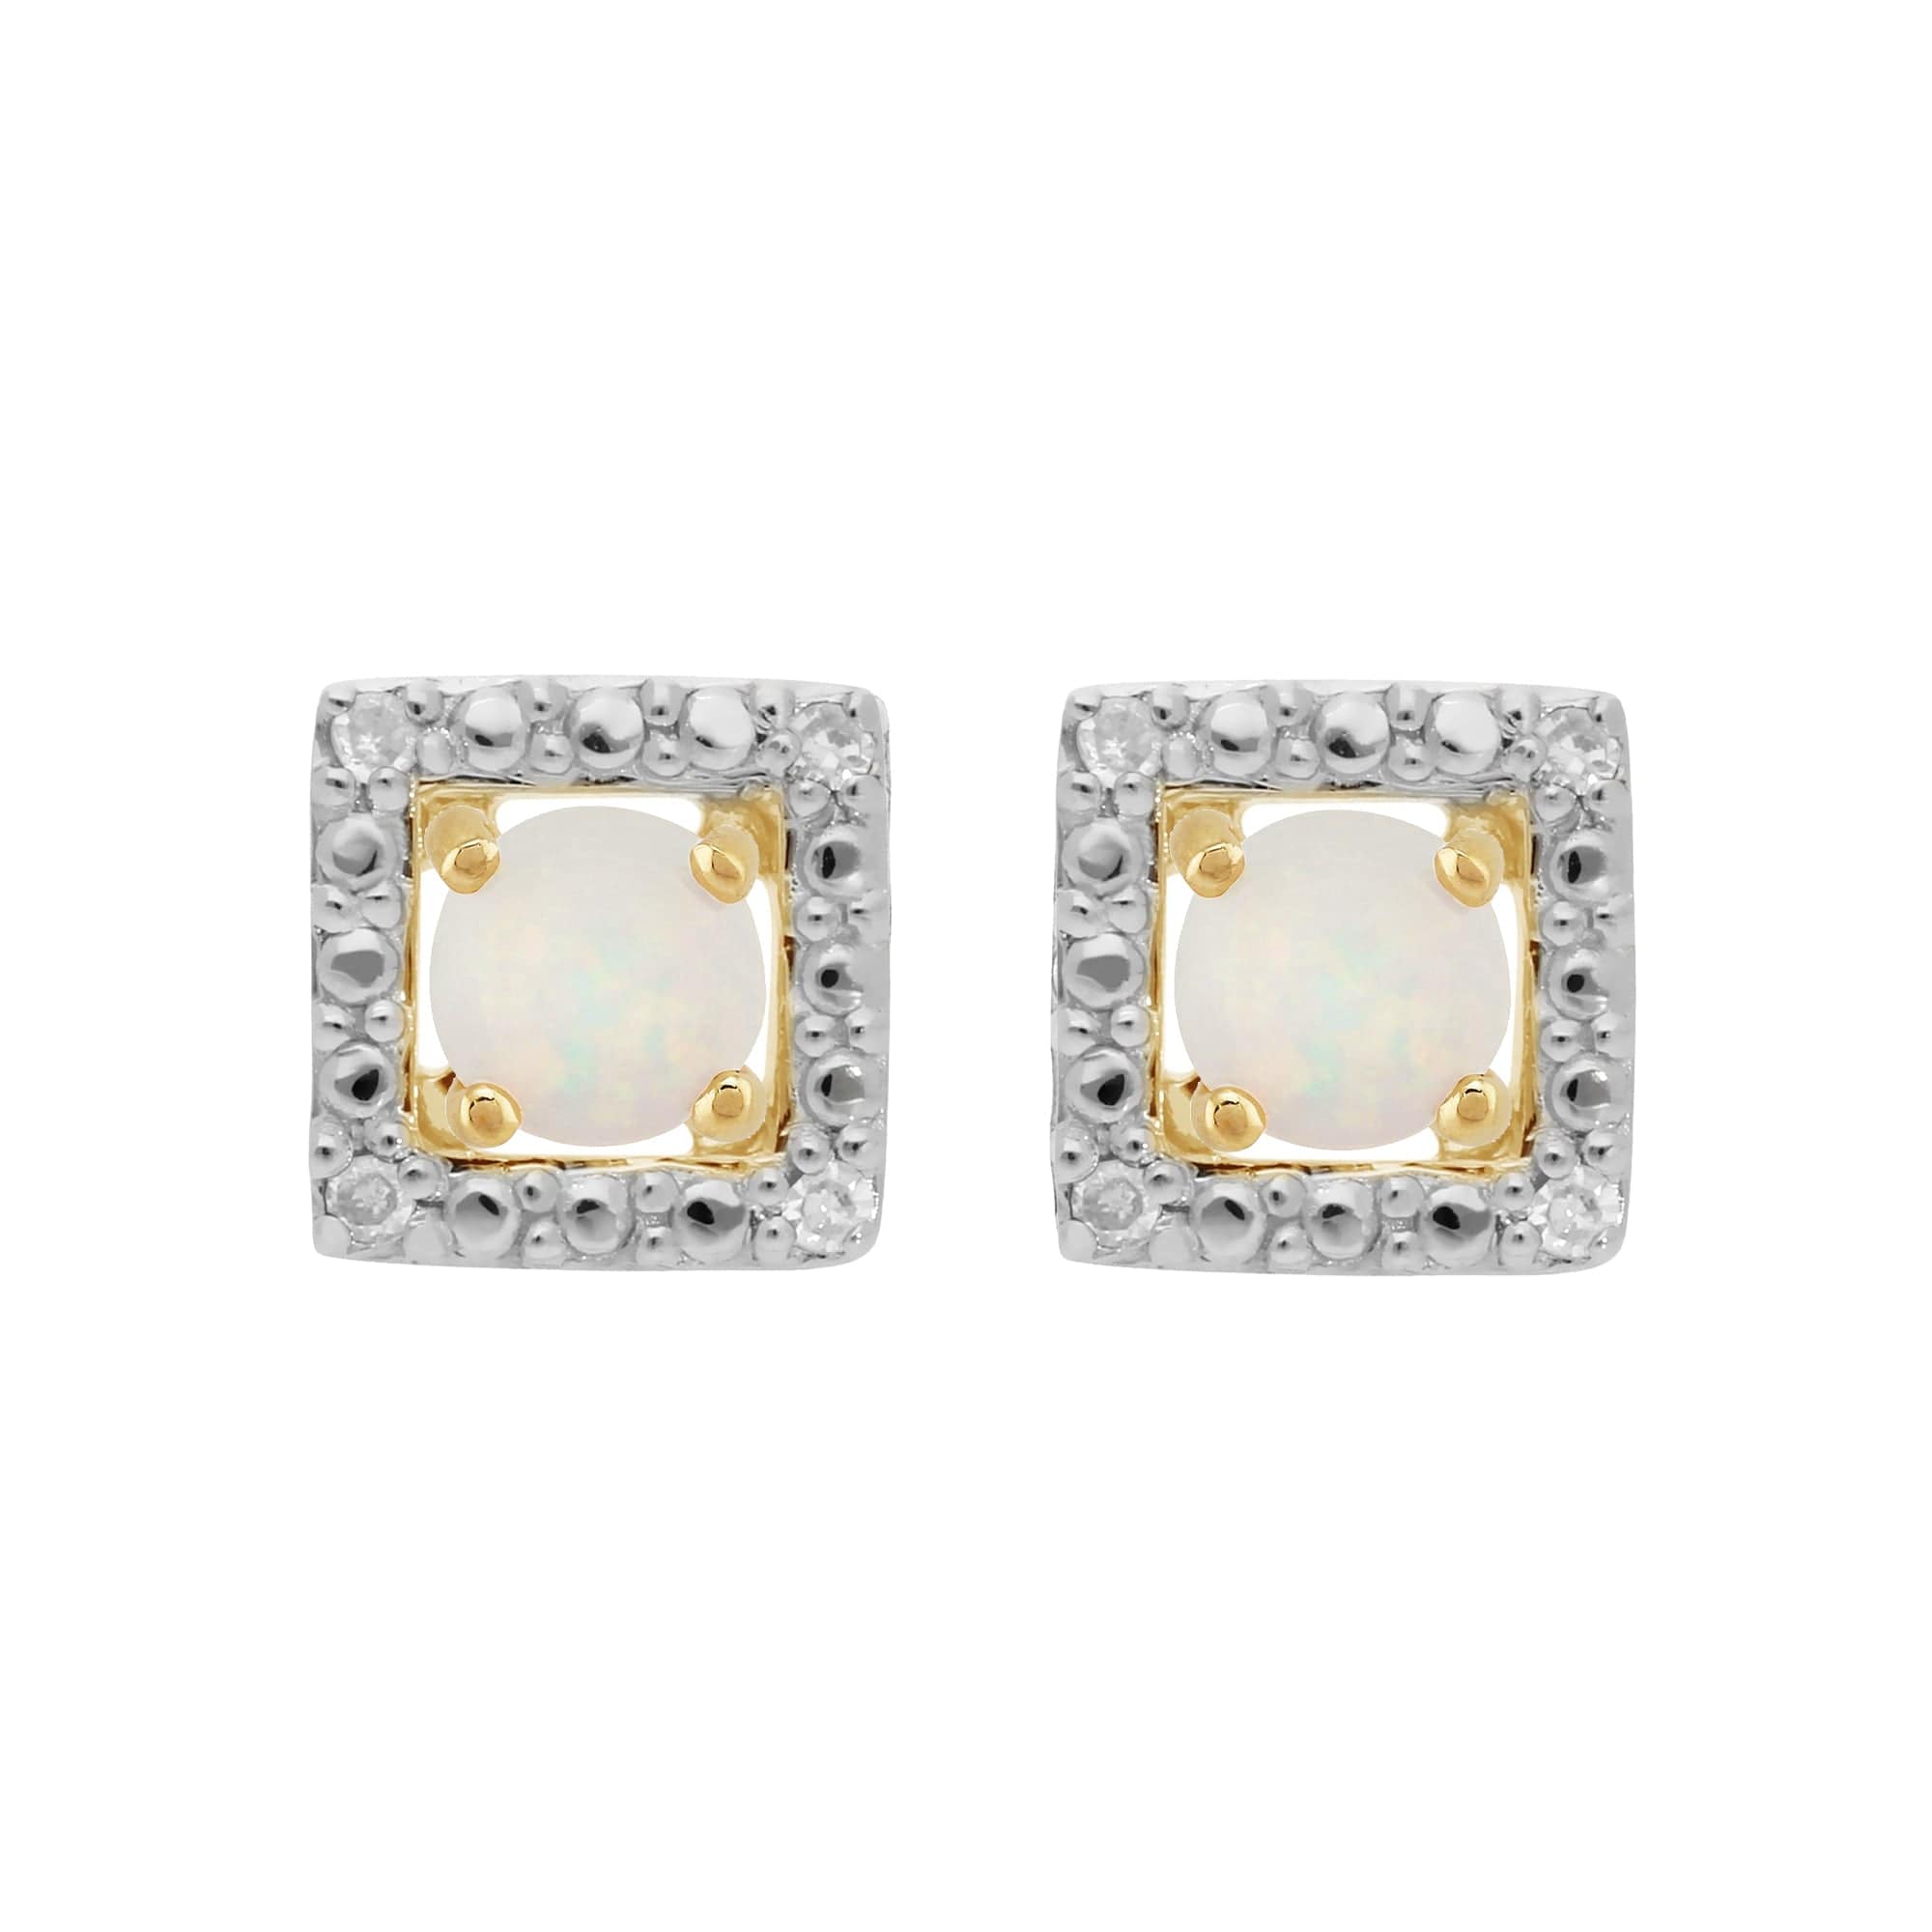 26942-191E0379019 Classic Round Opal Stud Earrings with Detachable Diamond Square Earrings Jacket Set in 9ct Yellow Gold 1